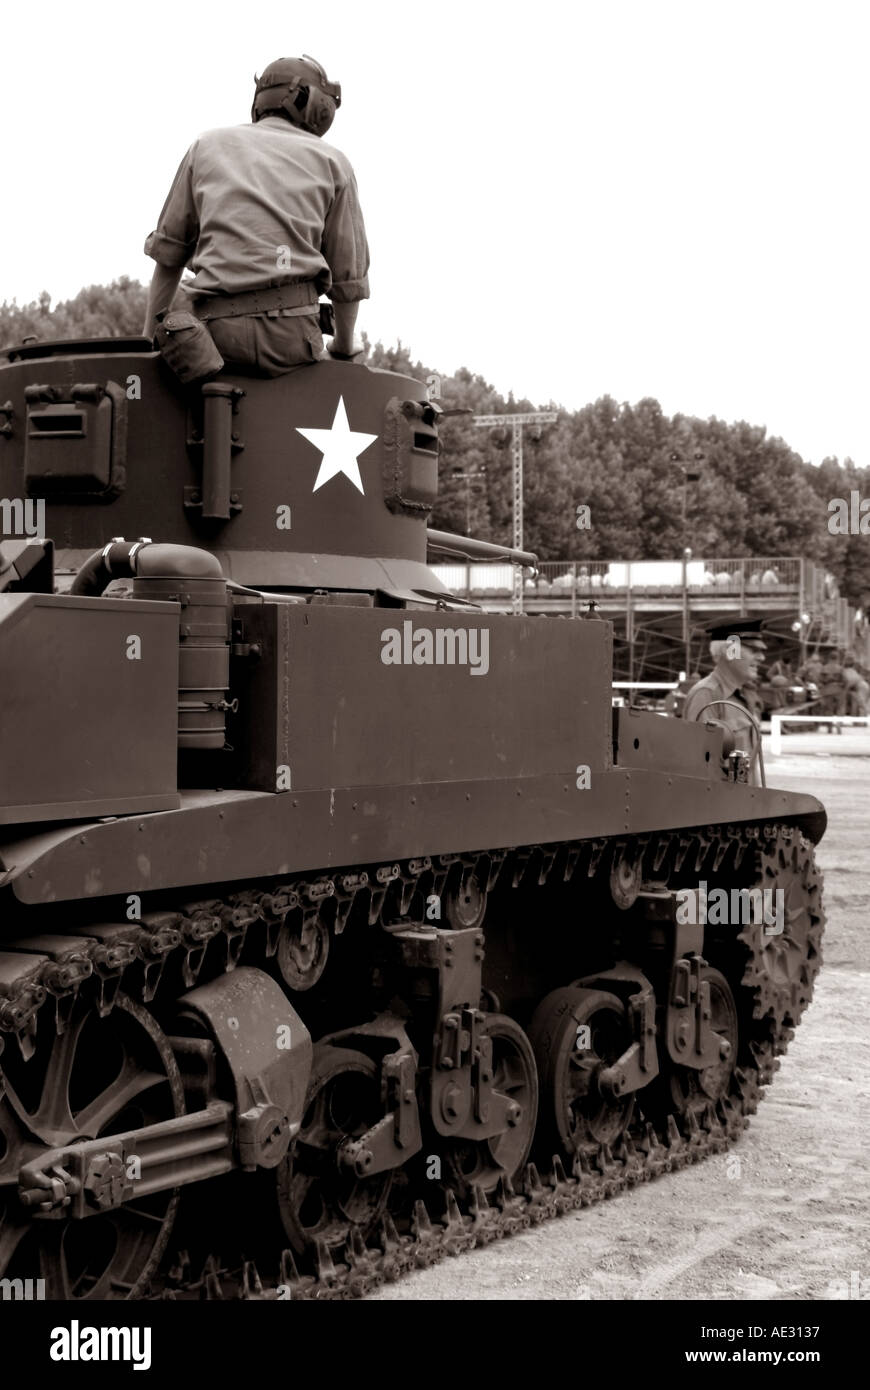 france maine et loire saumur tanks from the tank museum Musee des blindes taking part in festival  Stock Photo